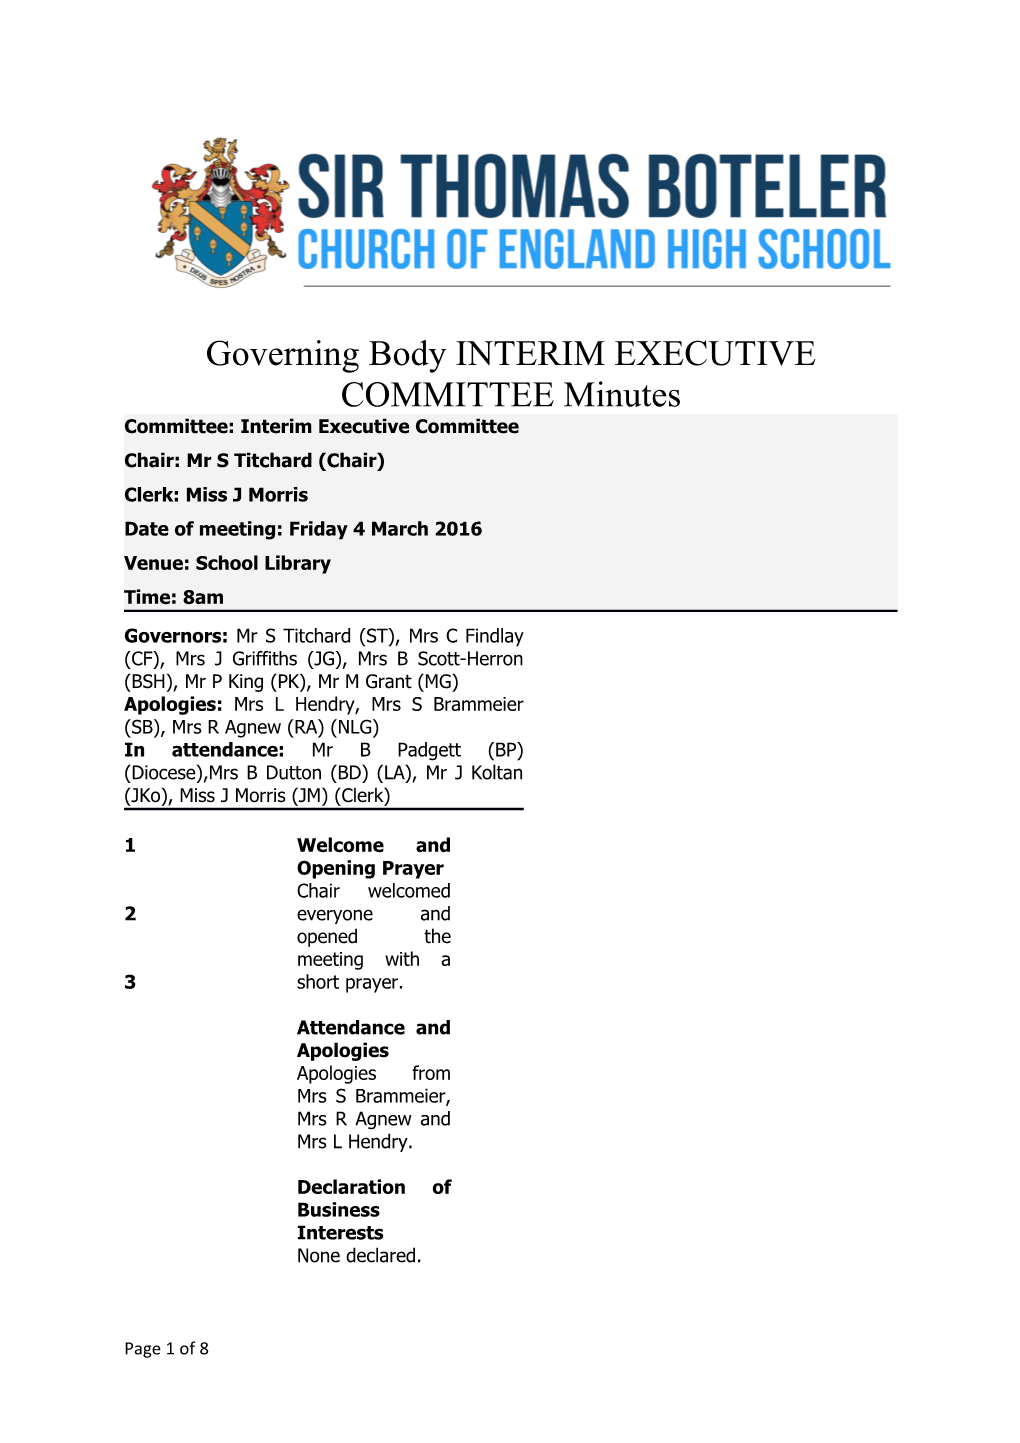 Governing Body INTERIM EXECUTIVE COMMITTEE Minutes